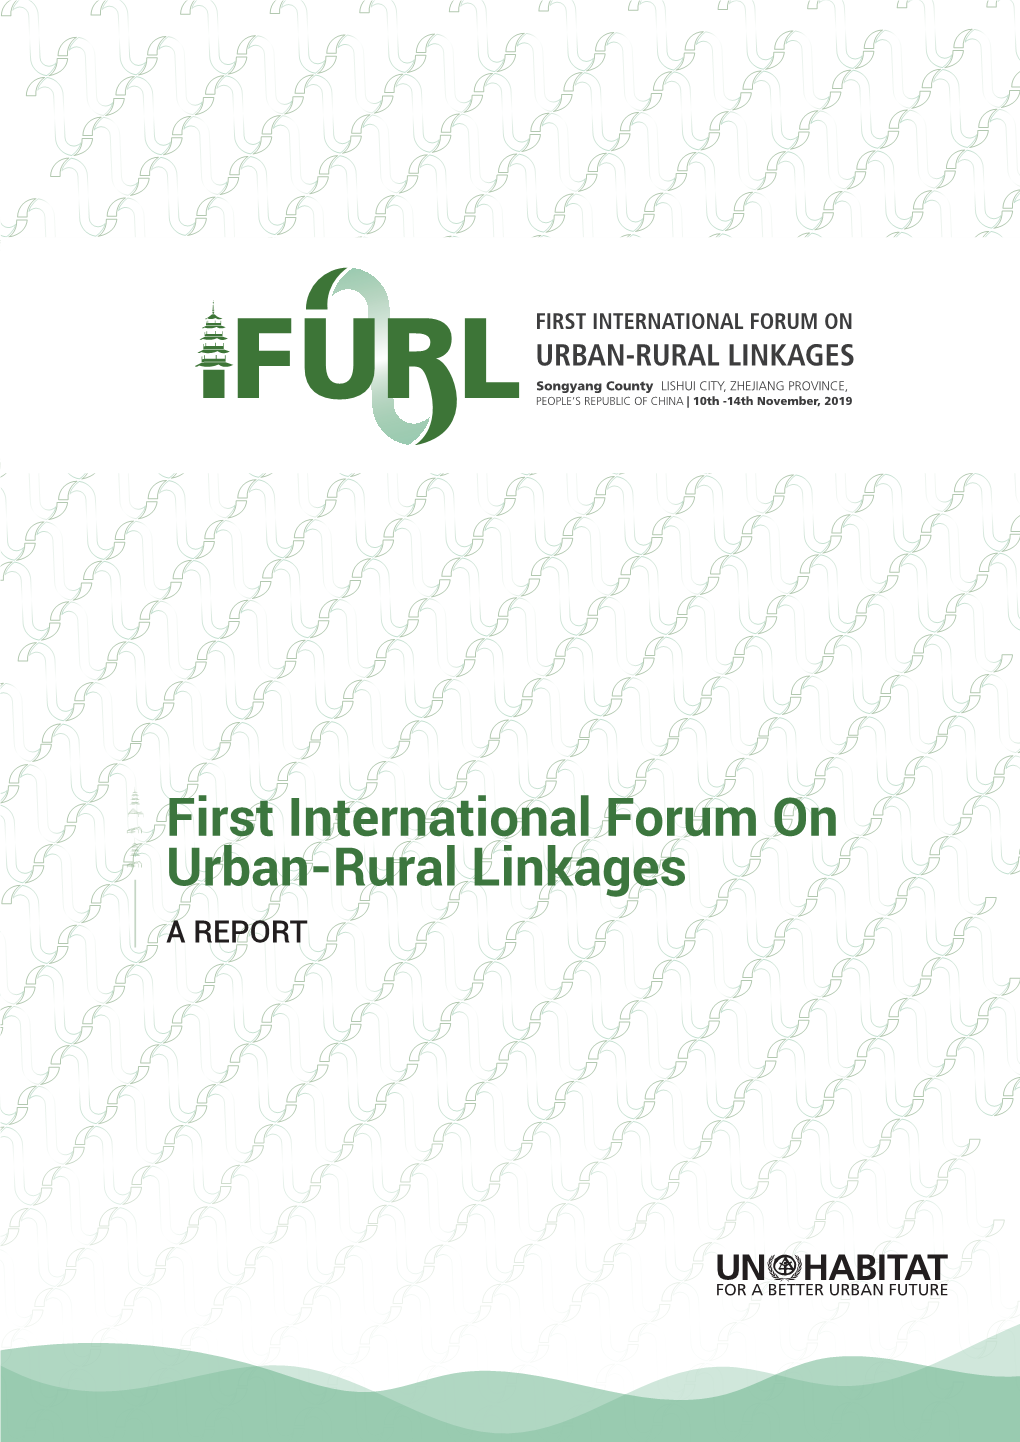 FIRST INTERNATIONAL FORUM on URBAN-RURAL LINKAGES Songyang County LISHUI CITY, ZHEJIANG PROVINCE, PEOPLE’S REPUBLIC of CHINA | 10Th -14Th November, 2019